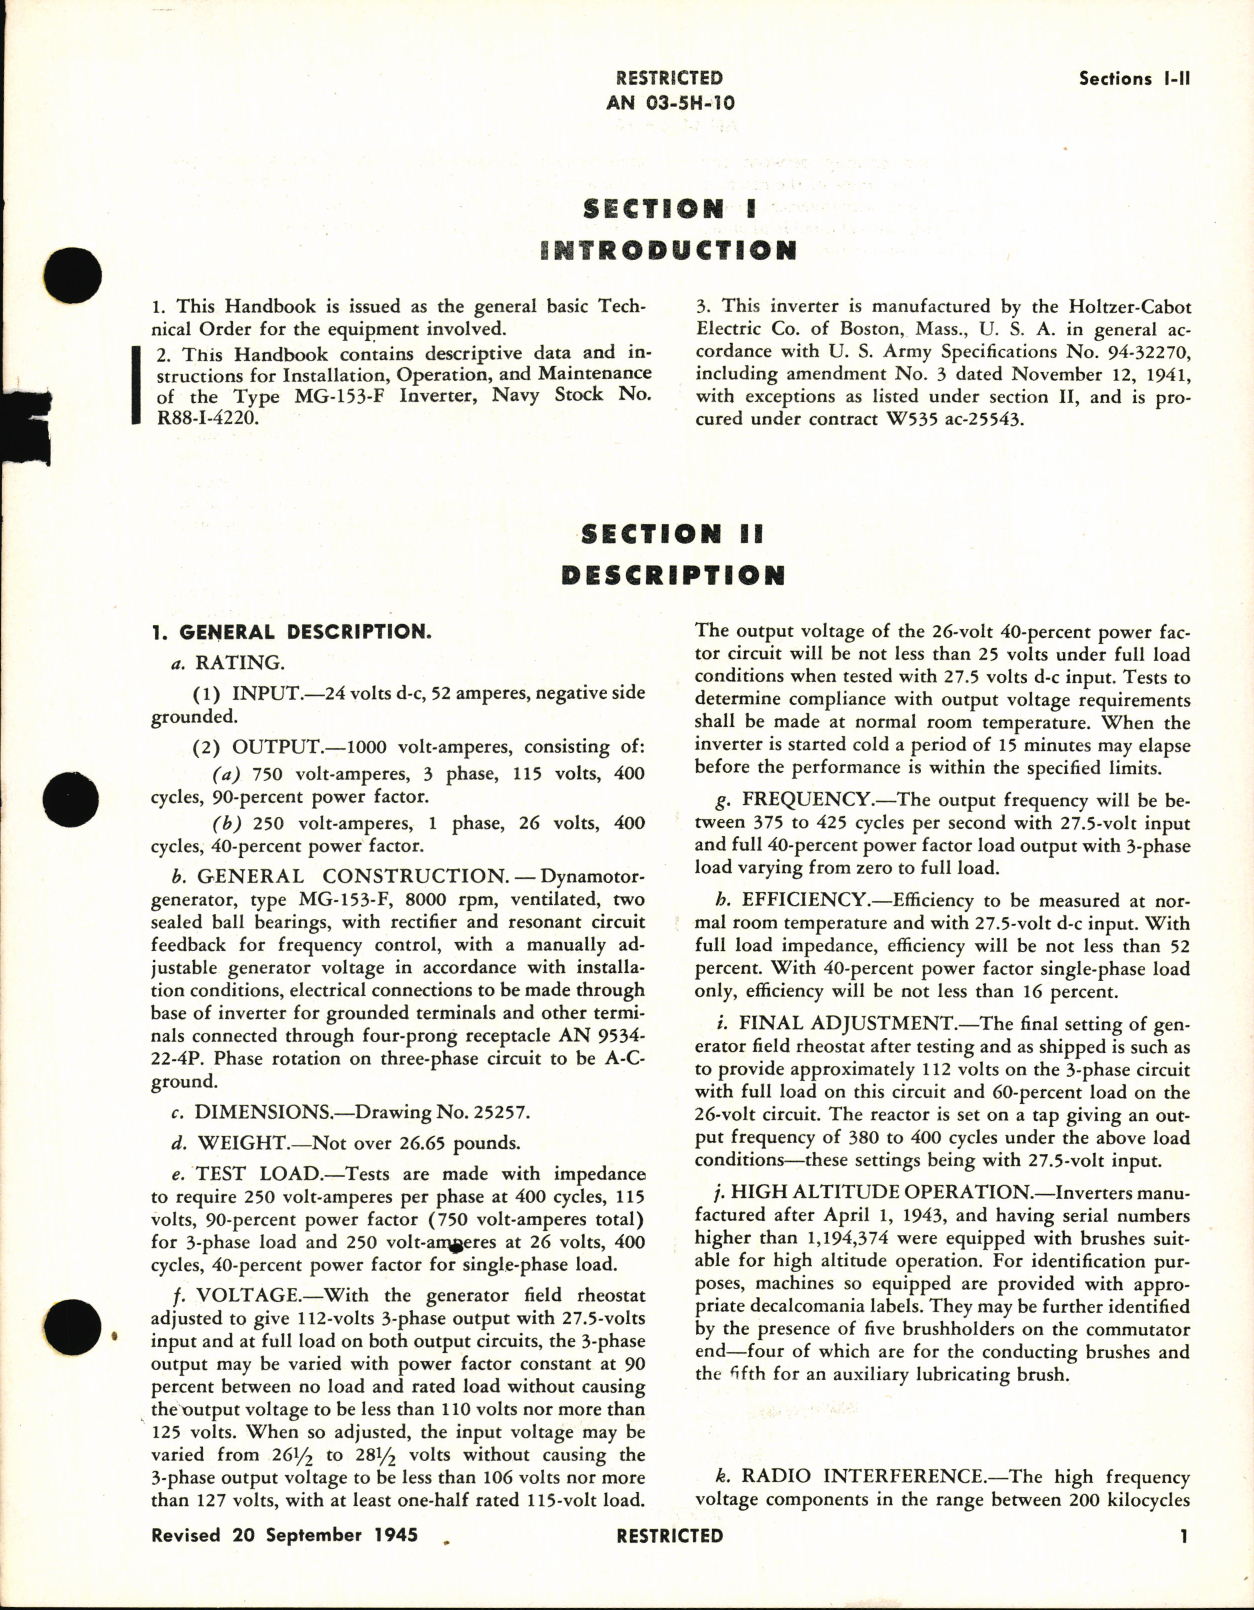 Sample page 5 from AirCorps Library document: Operation, Service & Overhaul Instructions with Parts Catalog for Inverter Type MG-153F (R88-I-4220)